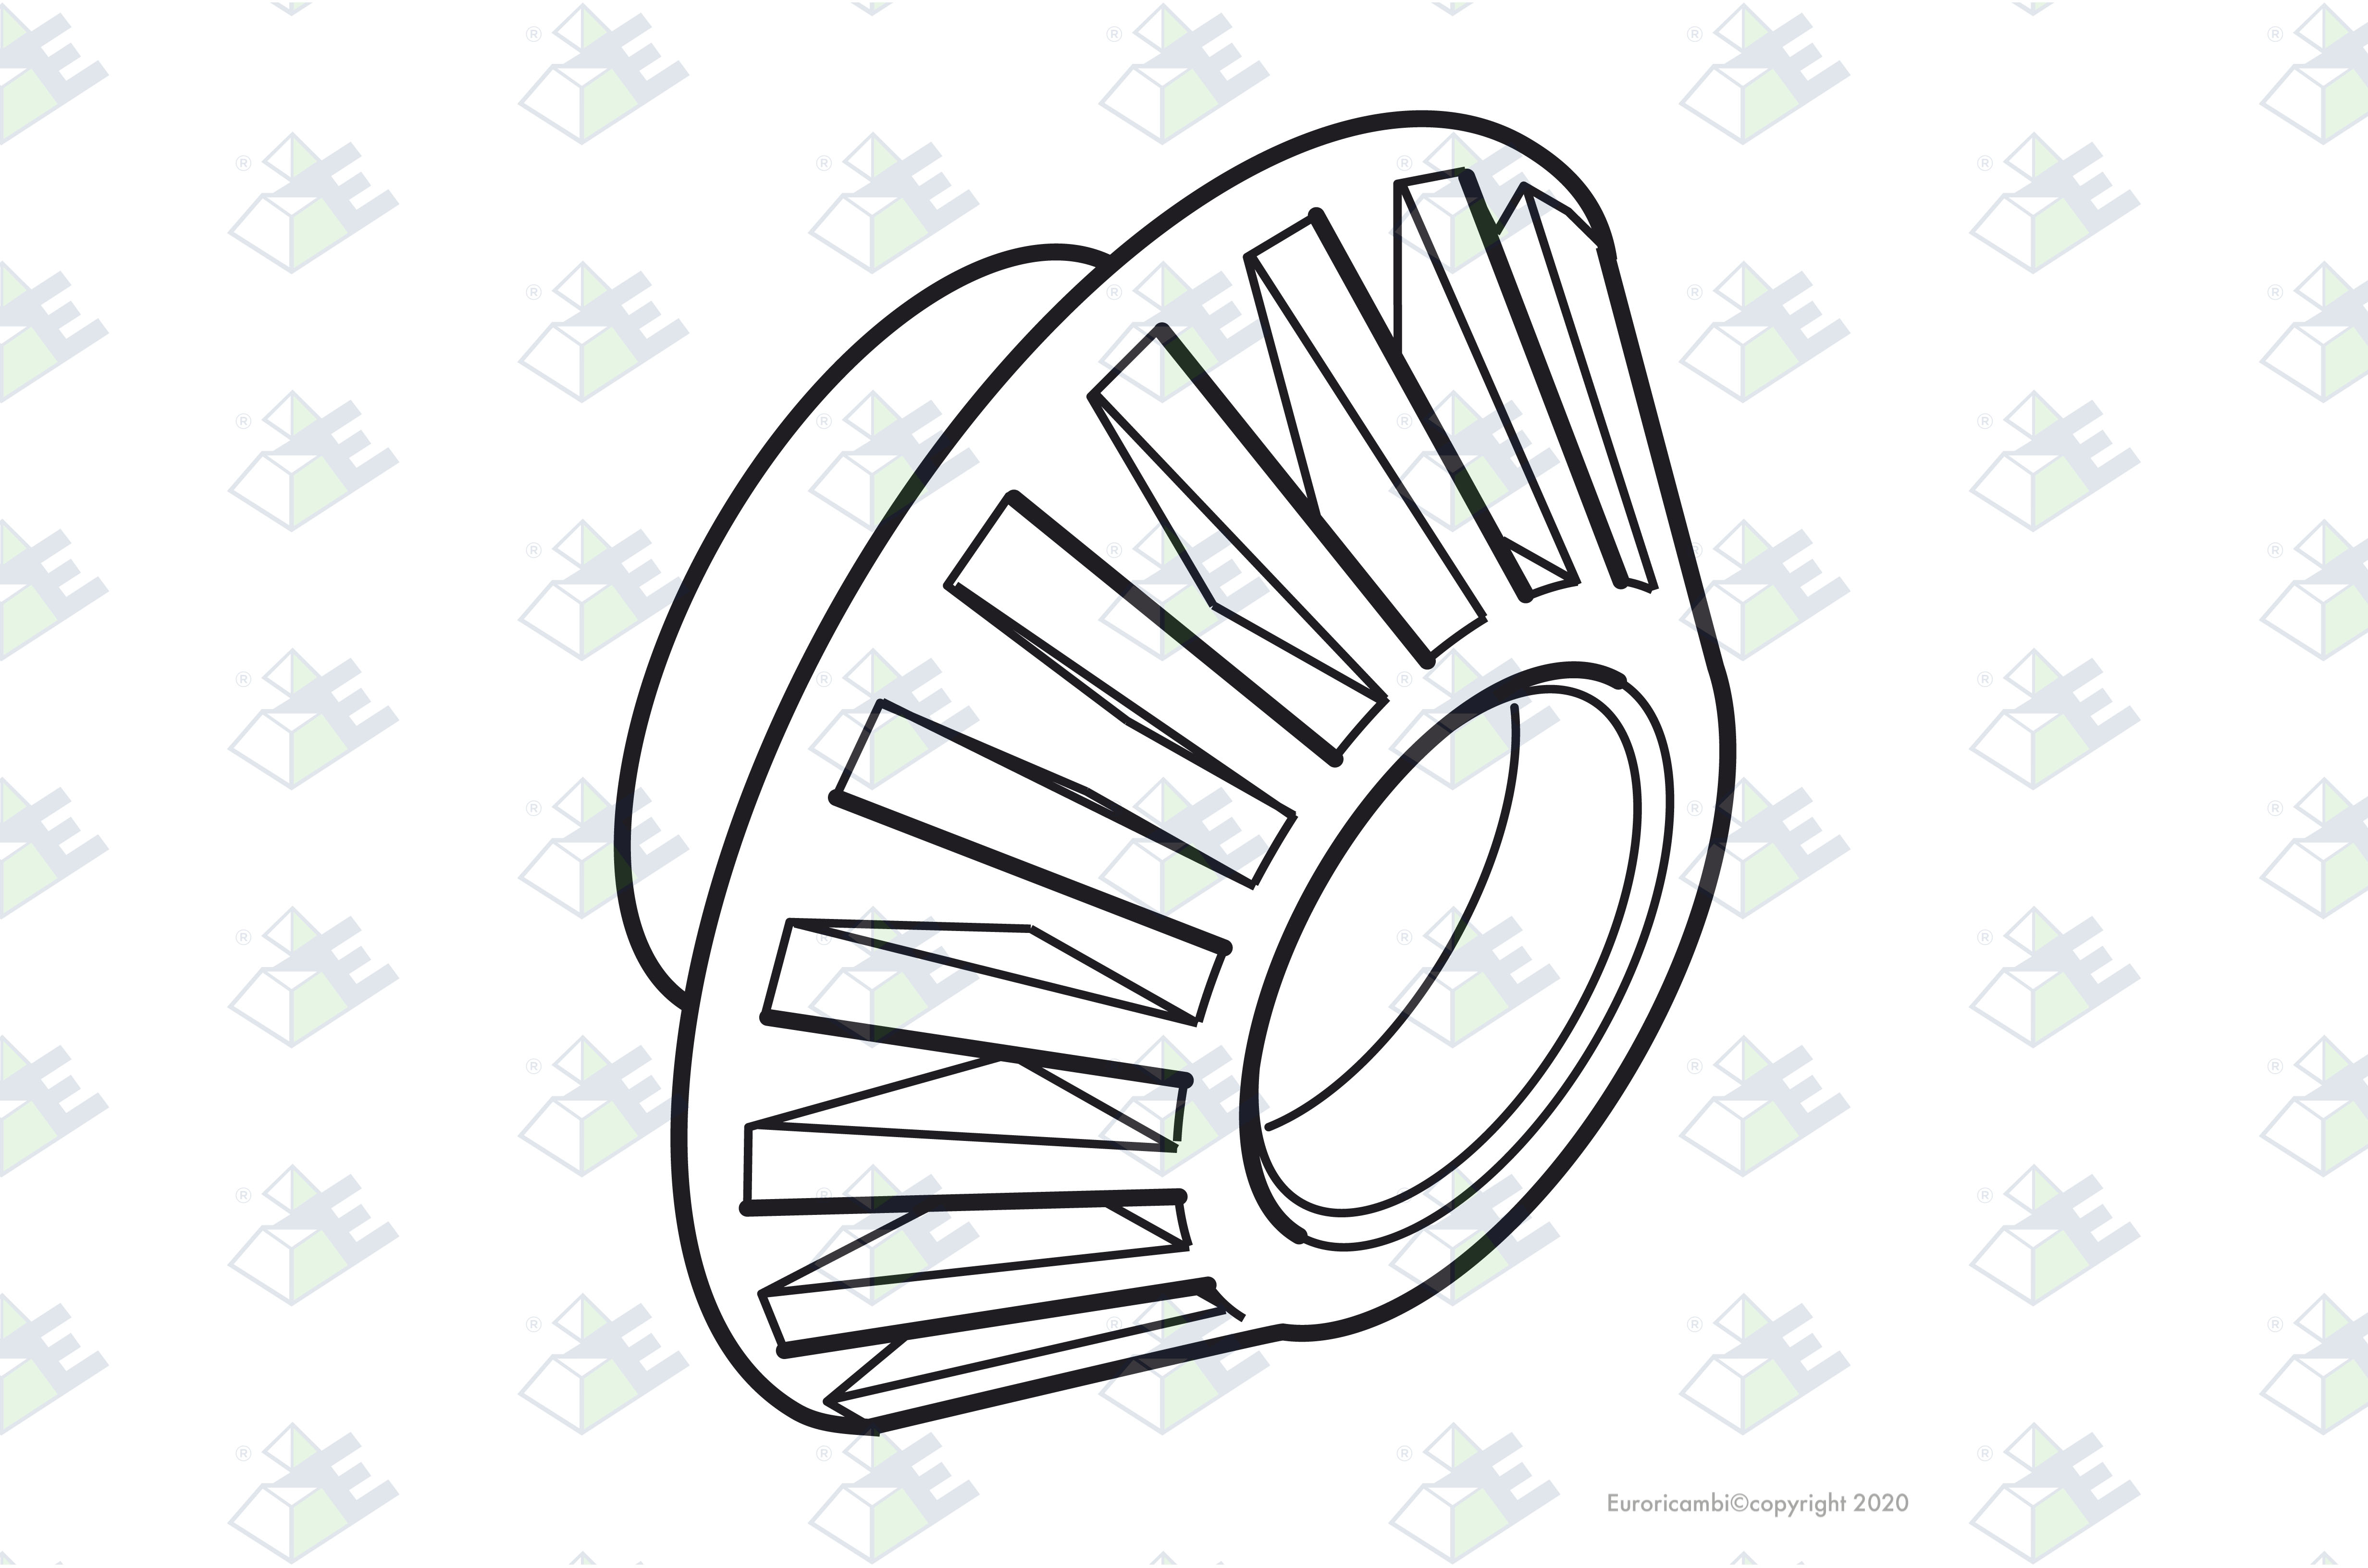 SIDE GEAR 16 T - 40 SPL. suitable to DAF 1295669